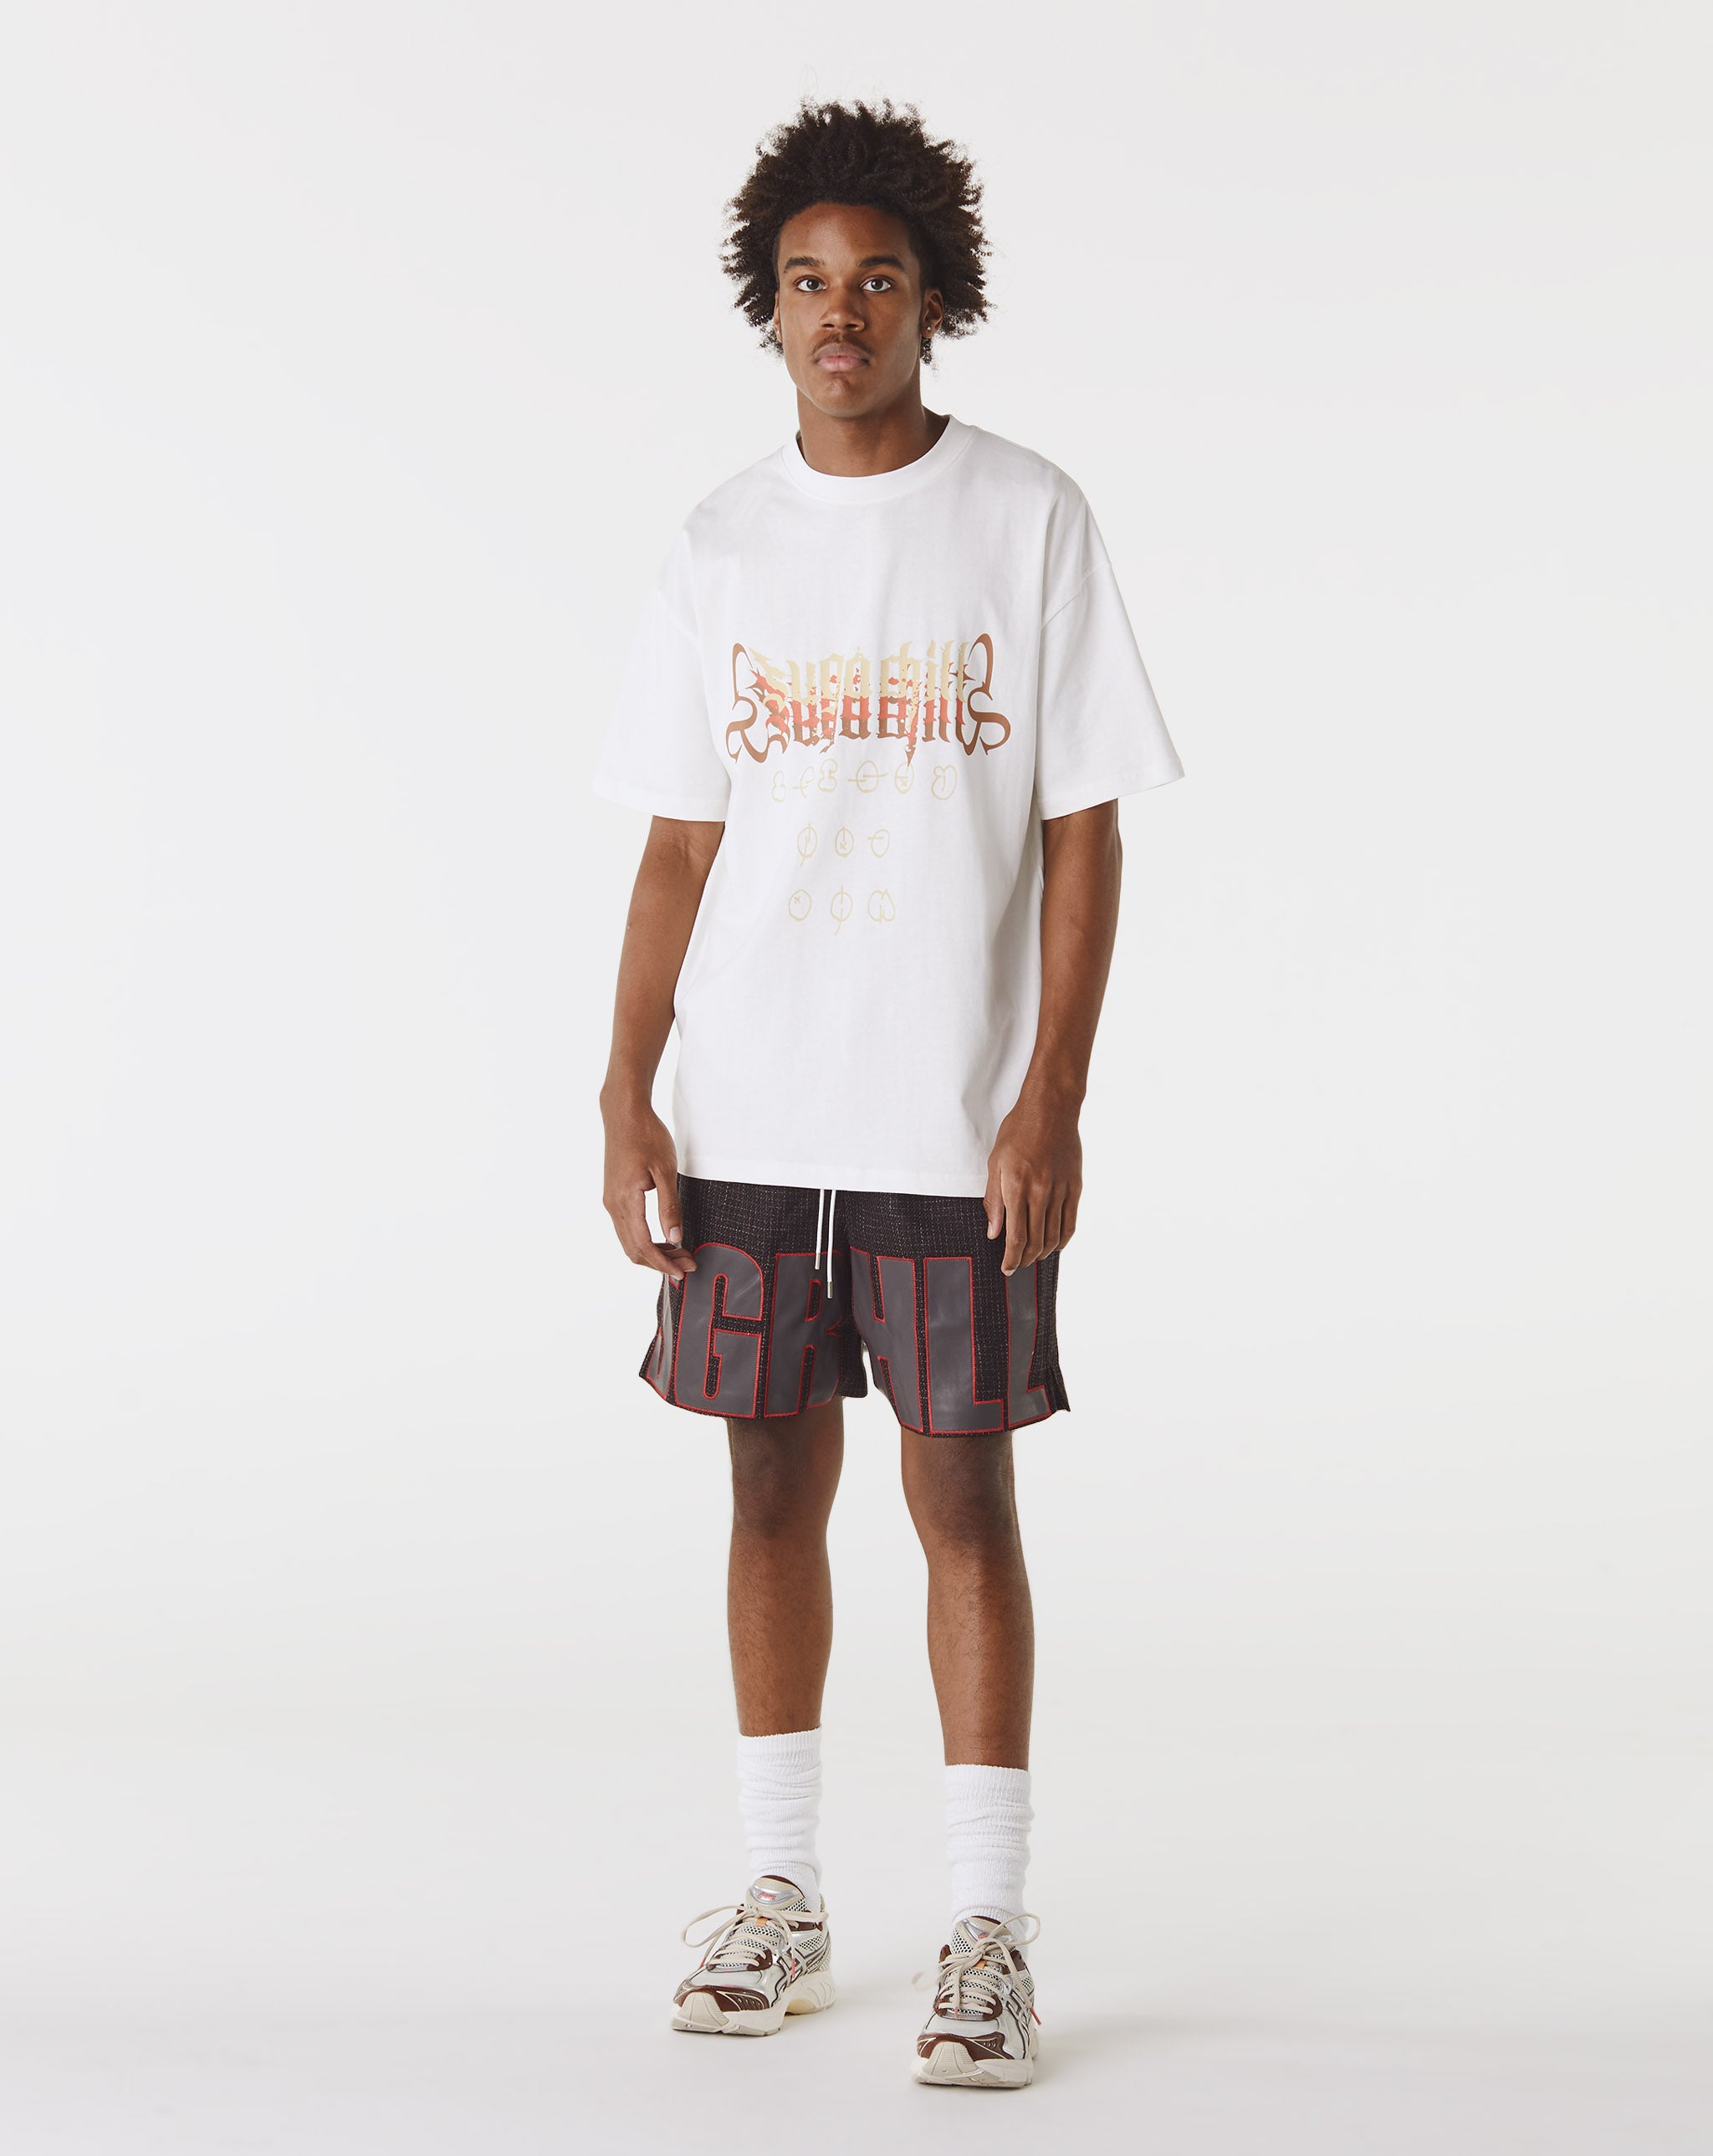 Sugarhill "Open Mind" Shorts - Rule of Next Apparel